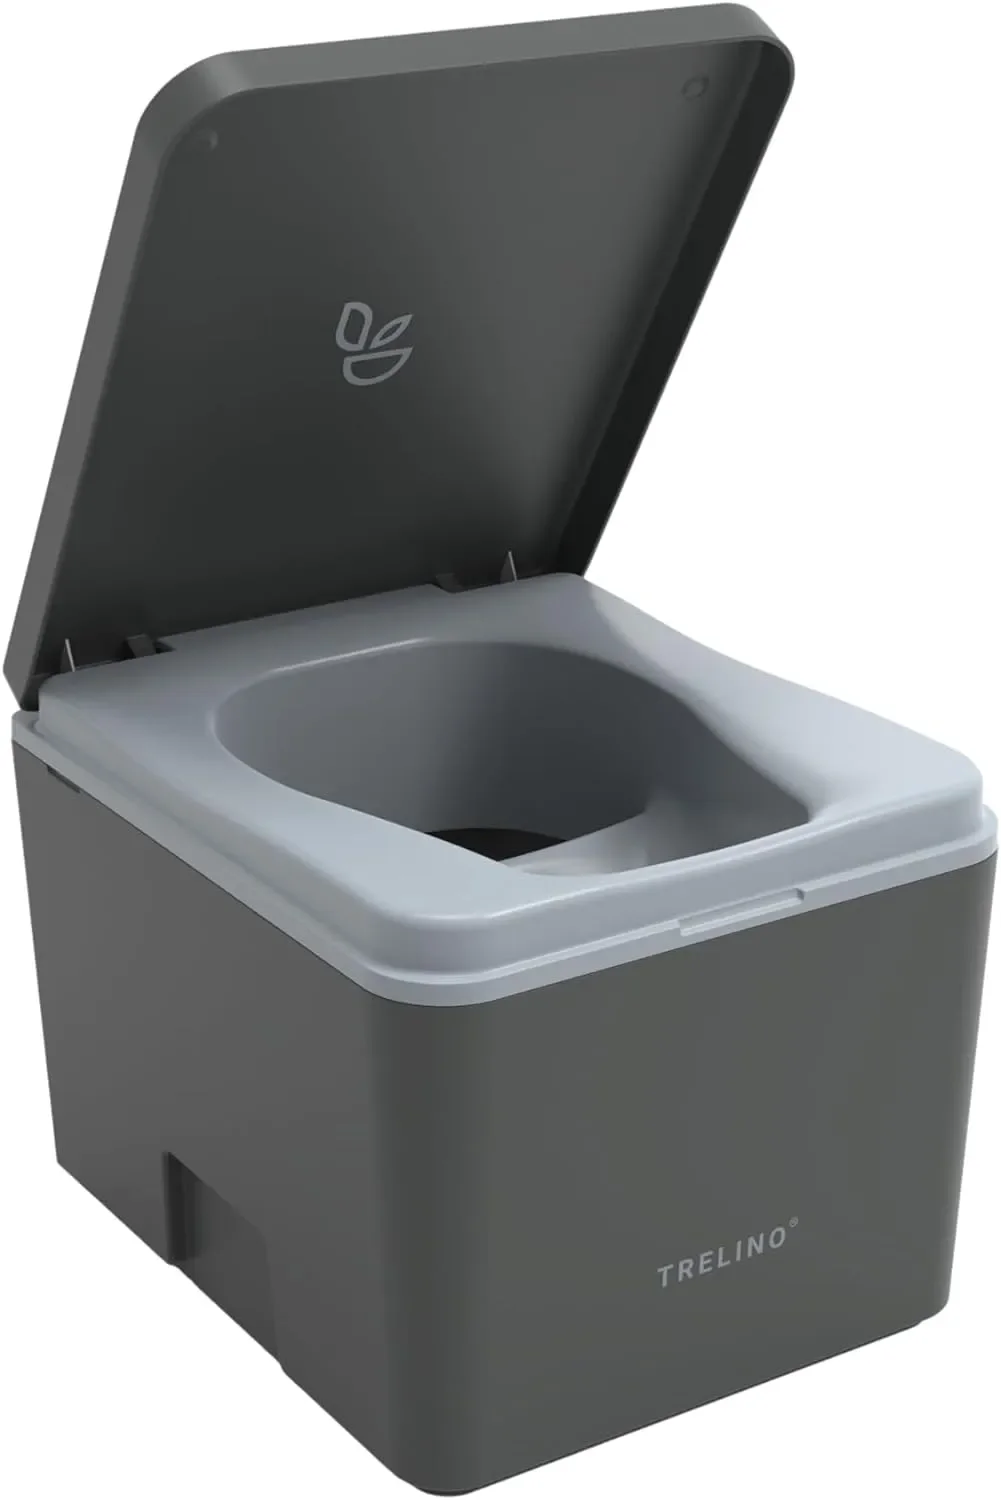 Trelino Evo Composting Toilet: I Tried It and Loved It